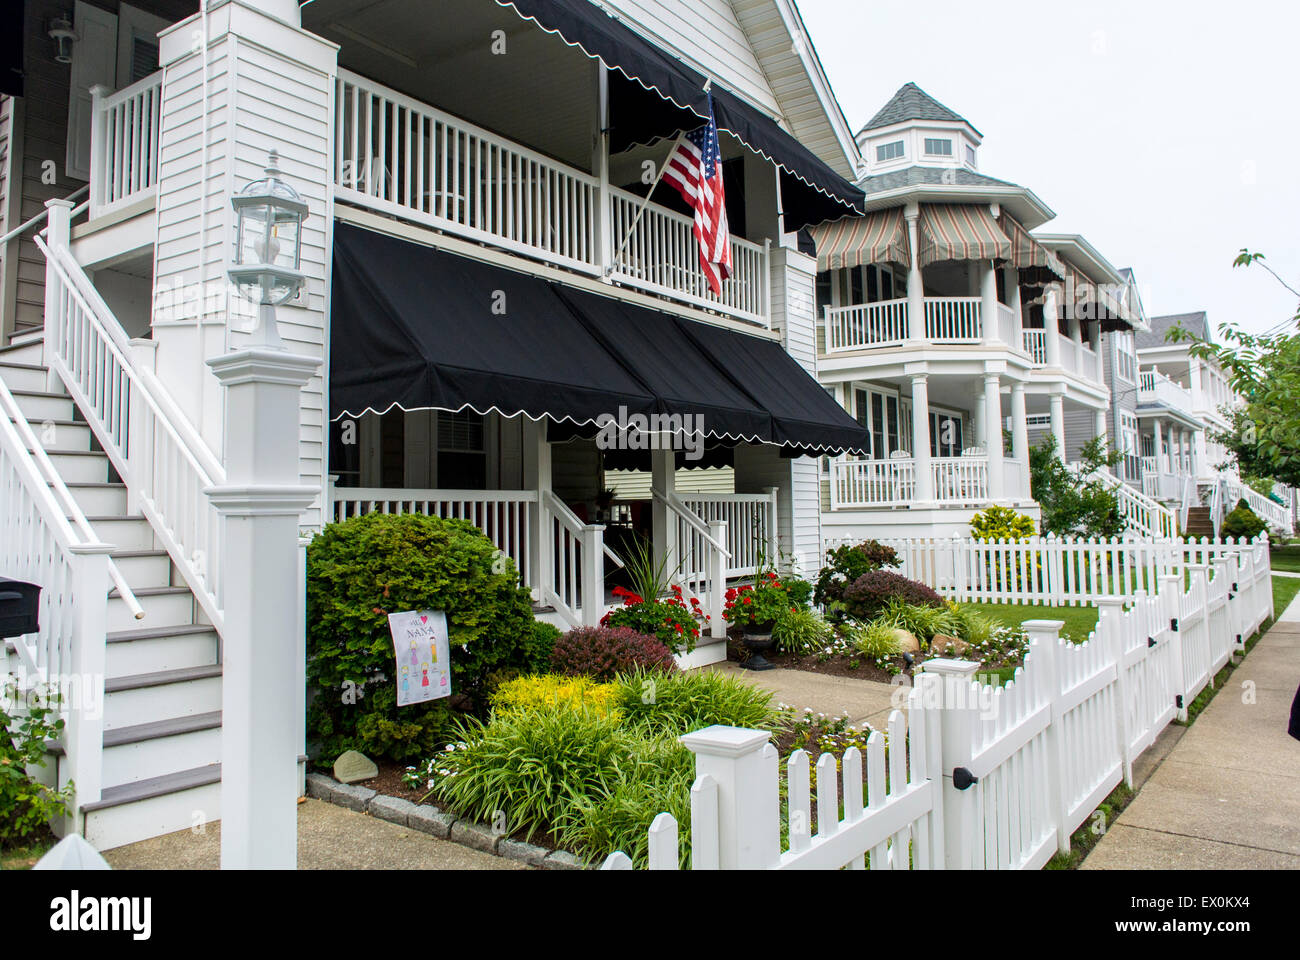 Ocean City, New Jersey, USA, Street Scenes, Traditional American Wooden Houses in city, Resort Town, victorian housing street Stock Photo